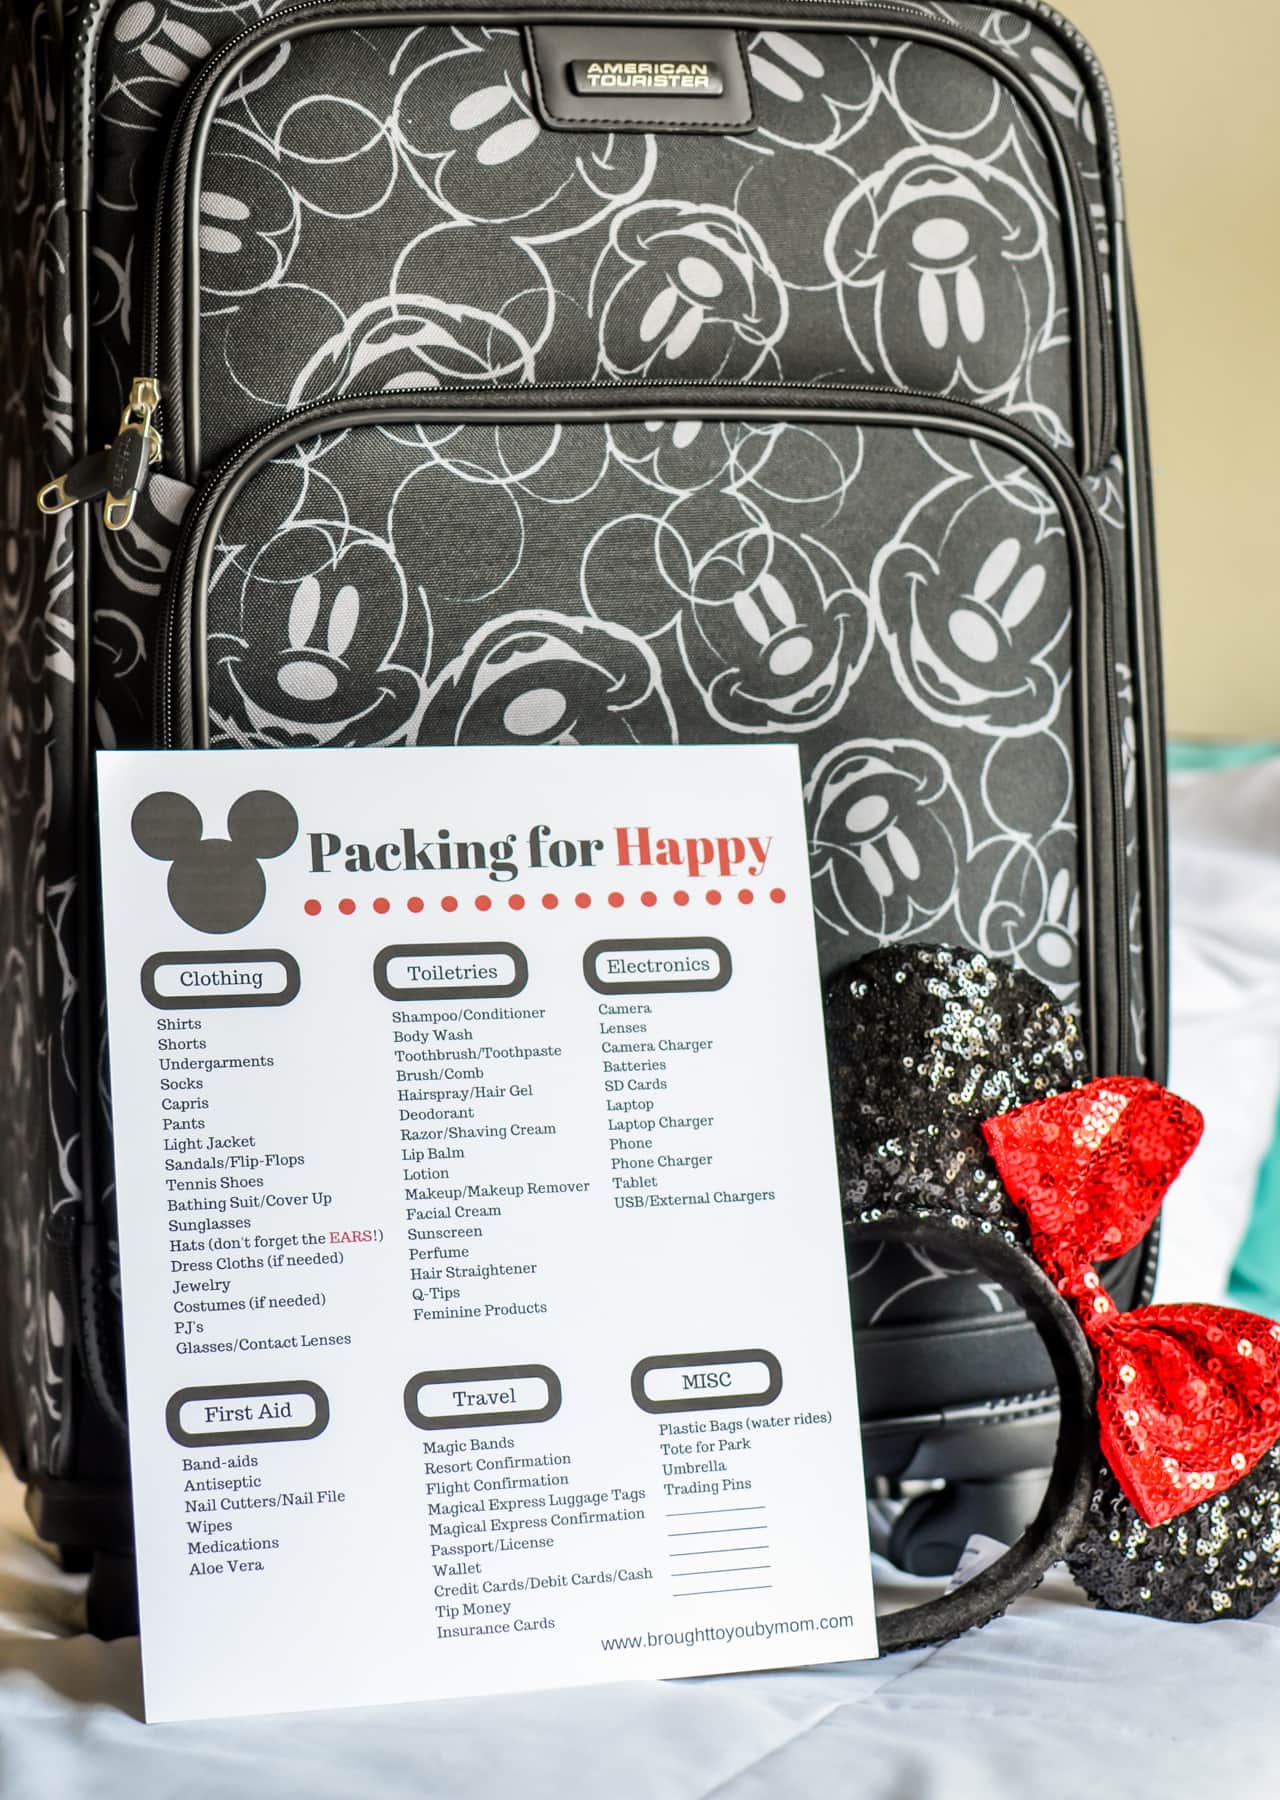 Simple Disney World Packing List - A basic list to inspire ideas of needs to pack to travel to Disney.